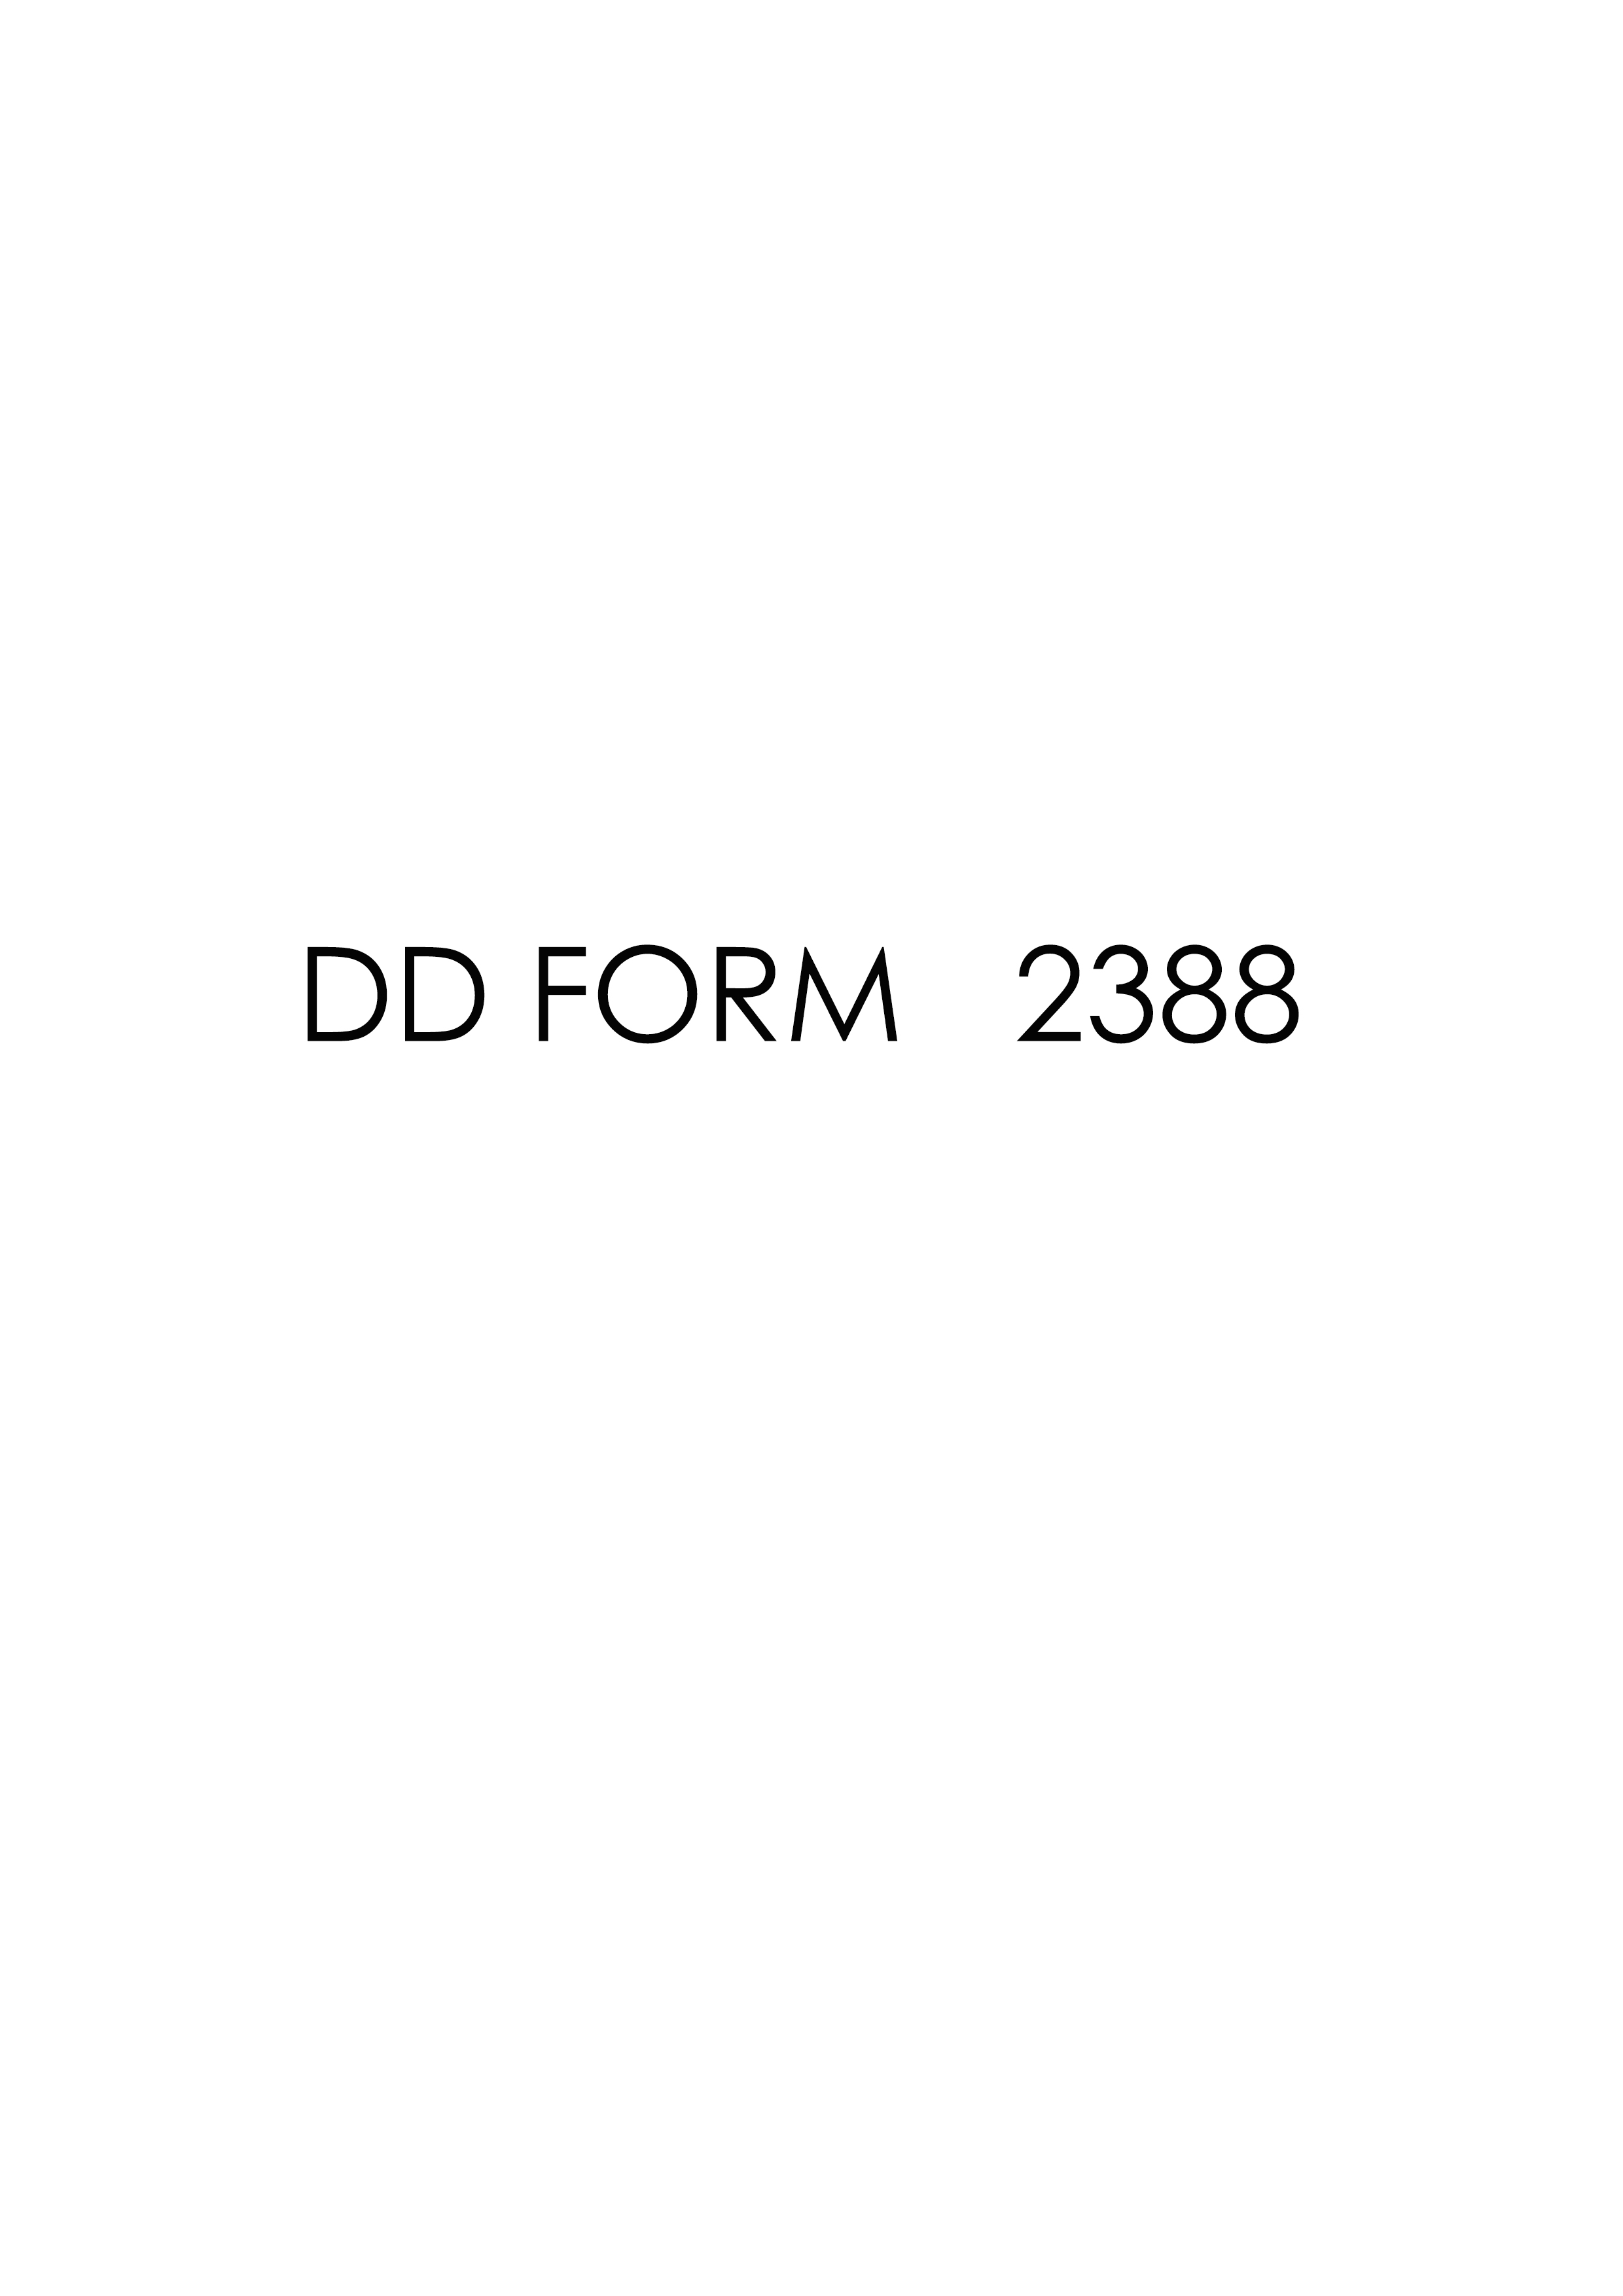 Download Fillable dd Form 2388